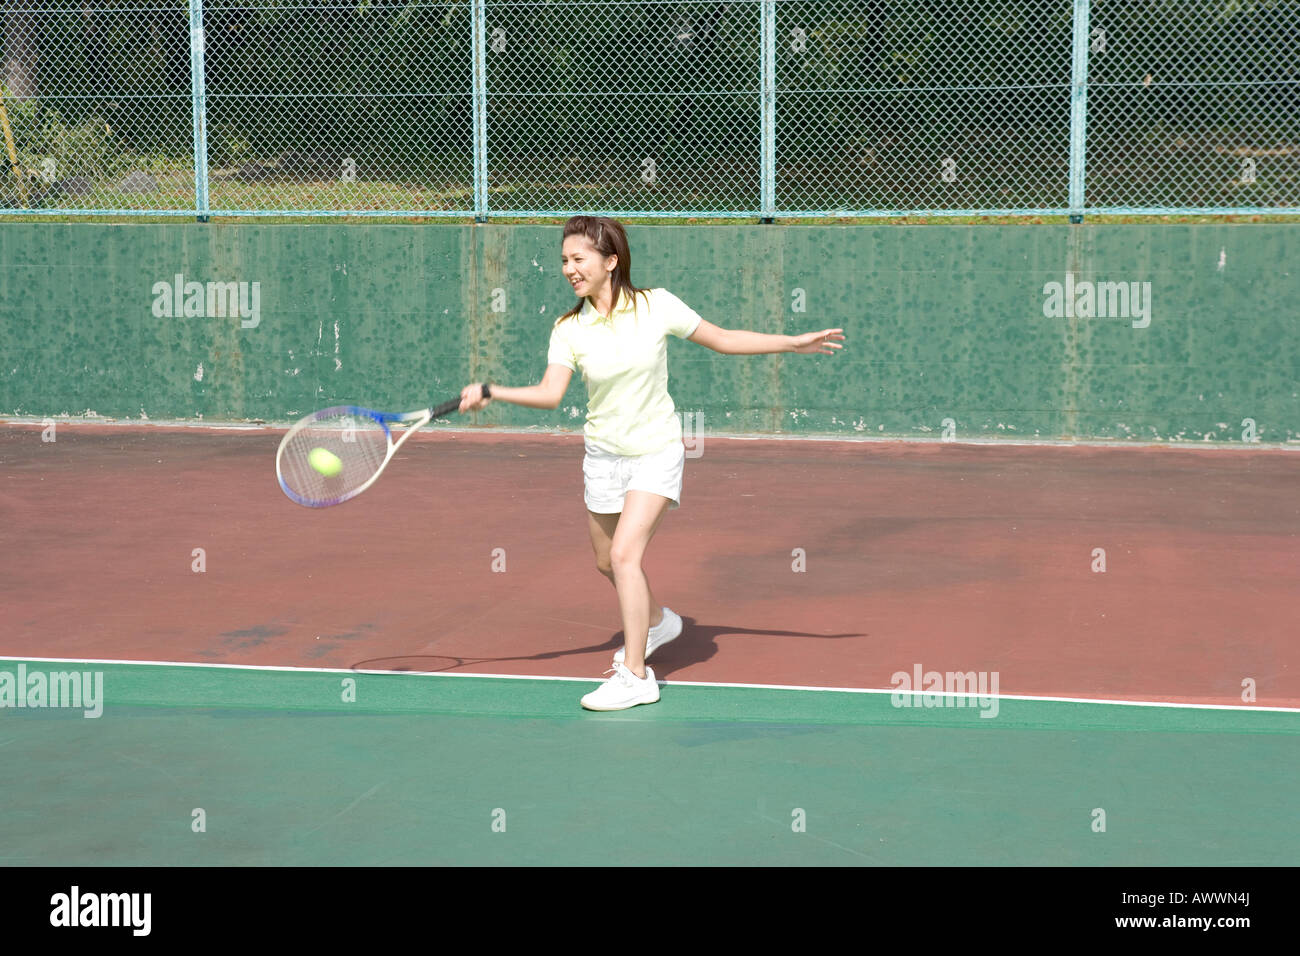 Teenage girl playing tennis sur cour Banque D'Images